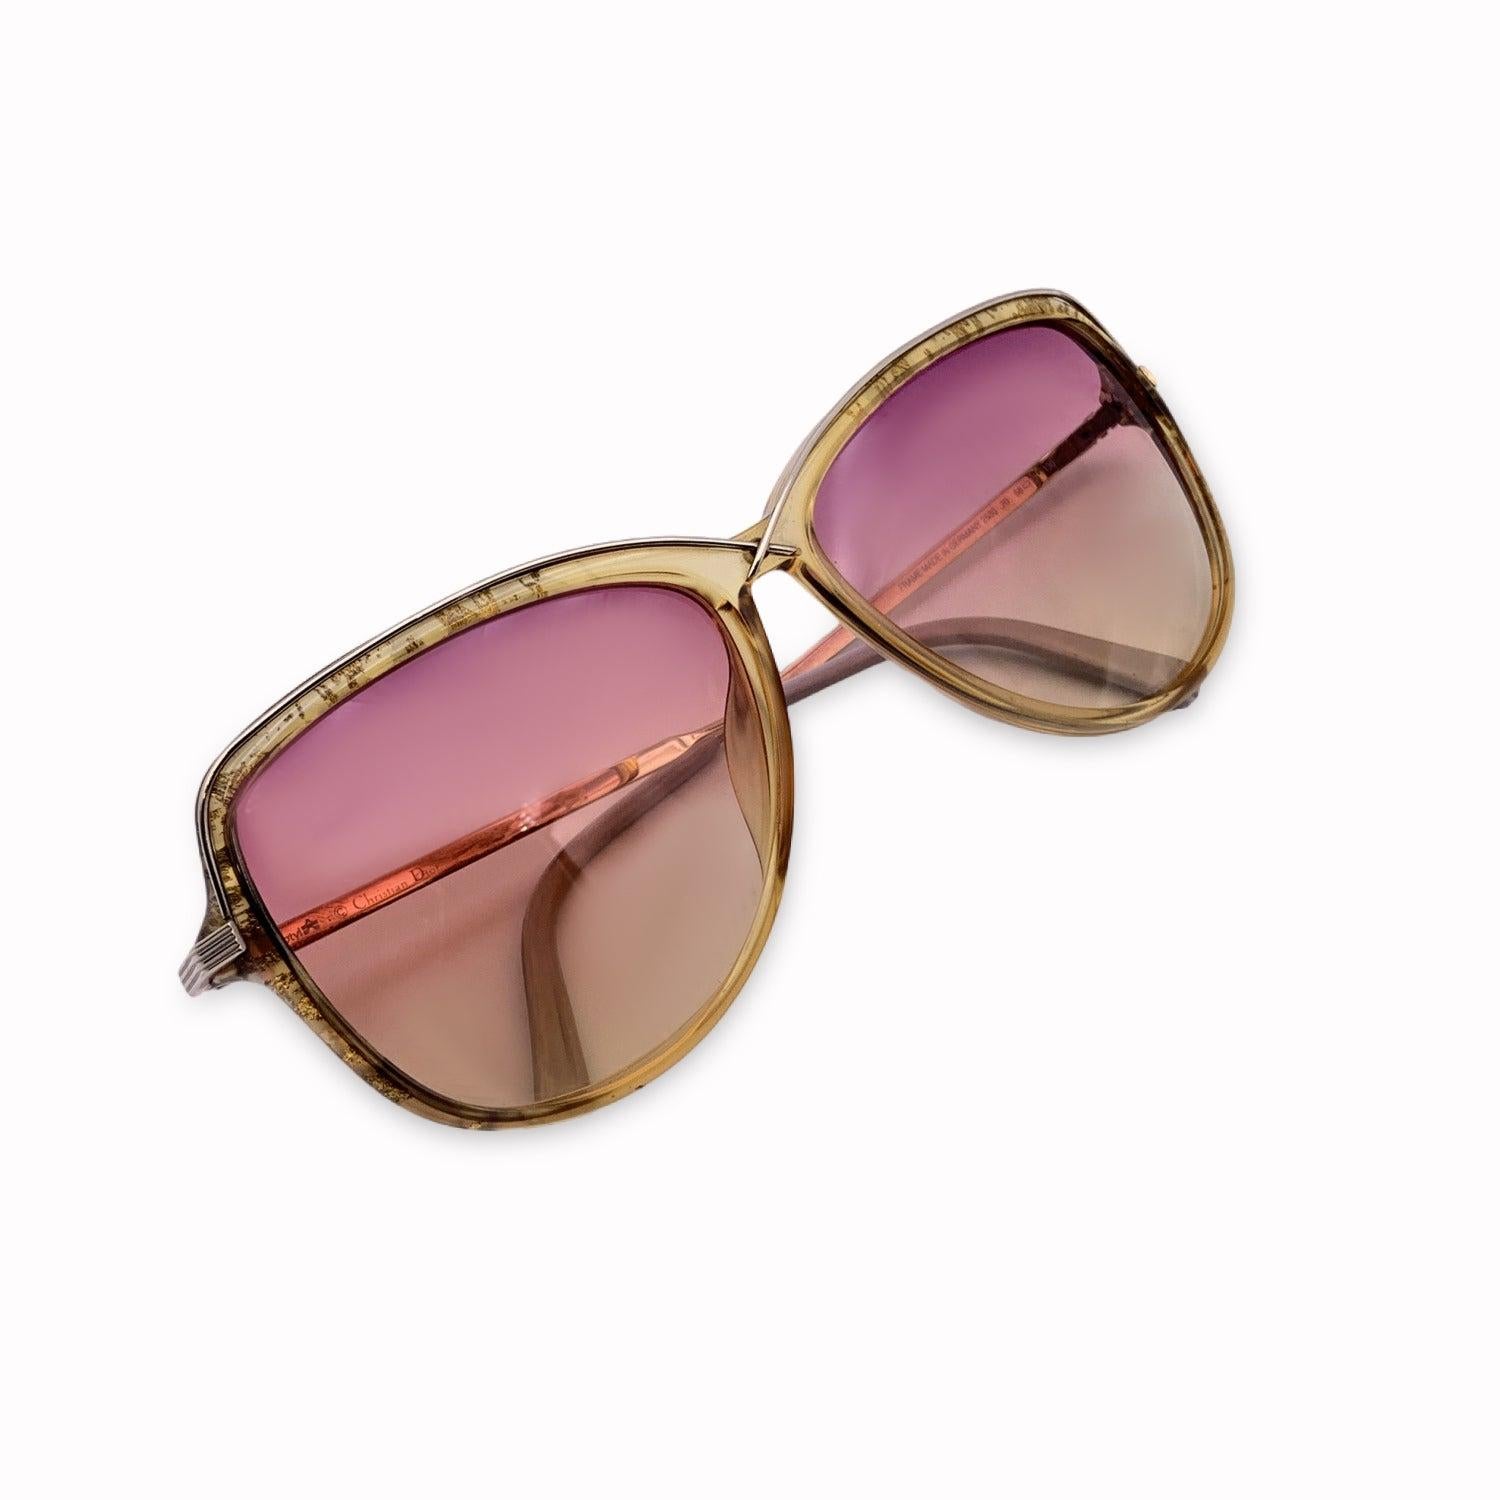 Vintage Christian Dior Women Sunglasses, Mod. 2530 20 Optyl. Size: 58/13 130mm. Beige acetate frame with gold metal finish. CD logo con temples . 100% Total UVA/UVB protection. Pink gradient lenses. Details MATERIAL: Plastic COLOR: Beige MODEL: 2530